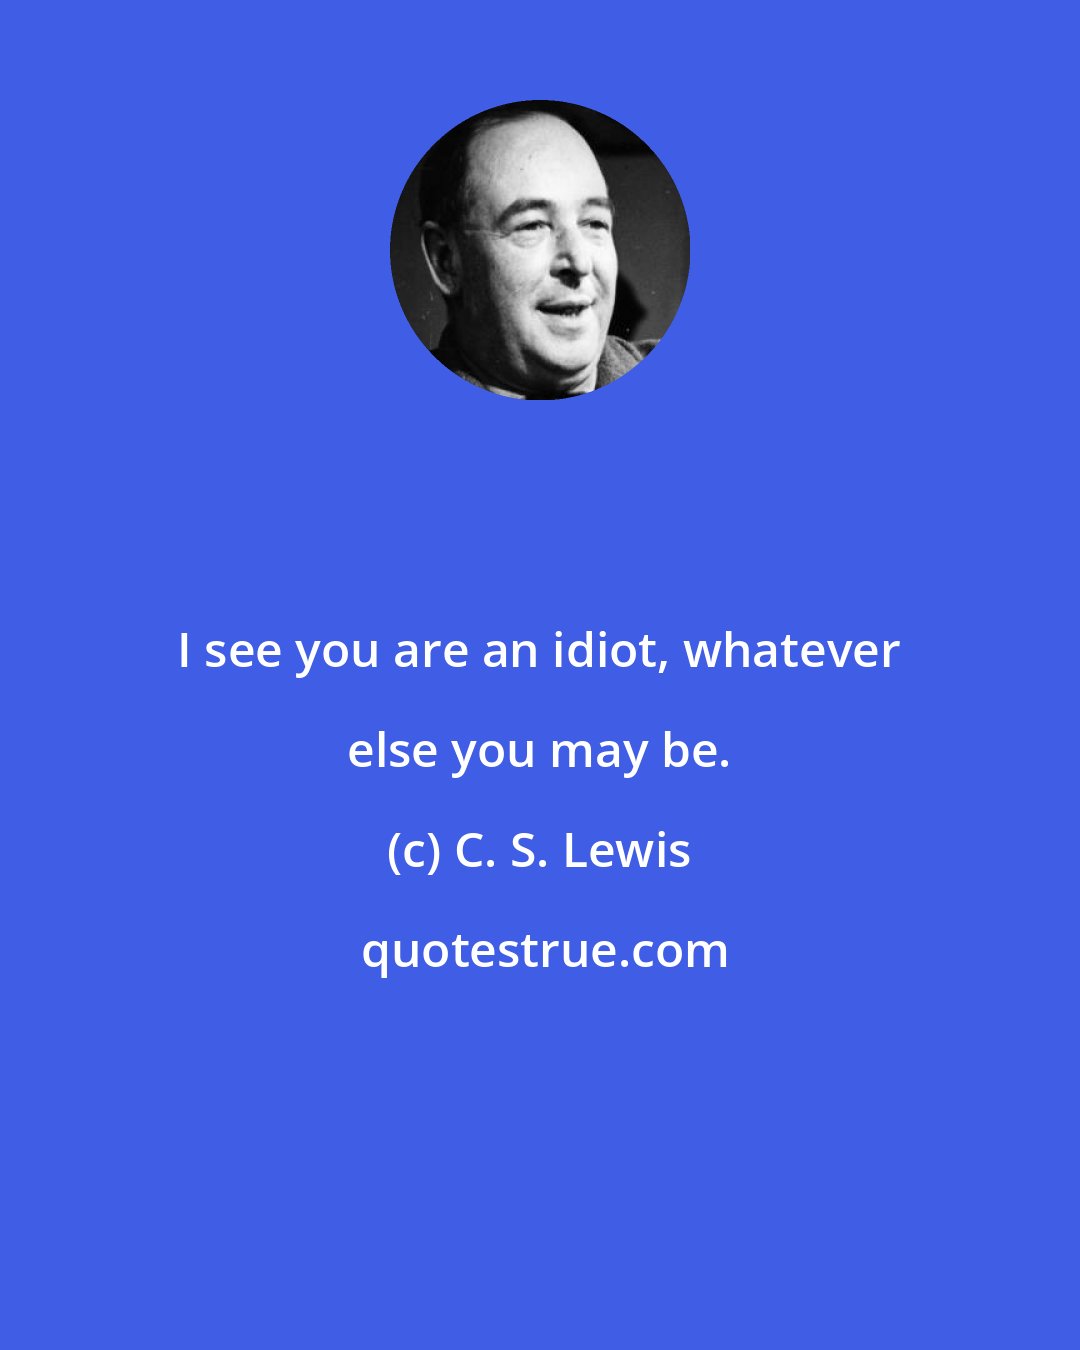 C. S. Lewis: I see you are an idiot, whatever else you may be.